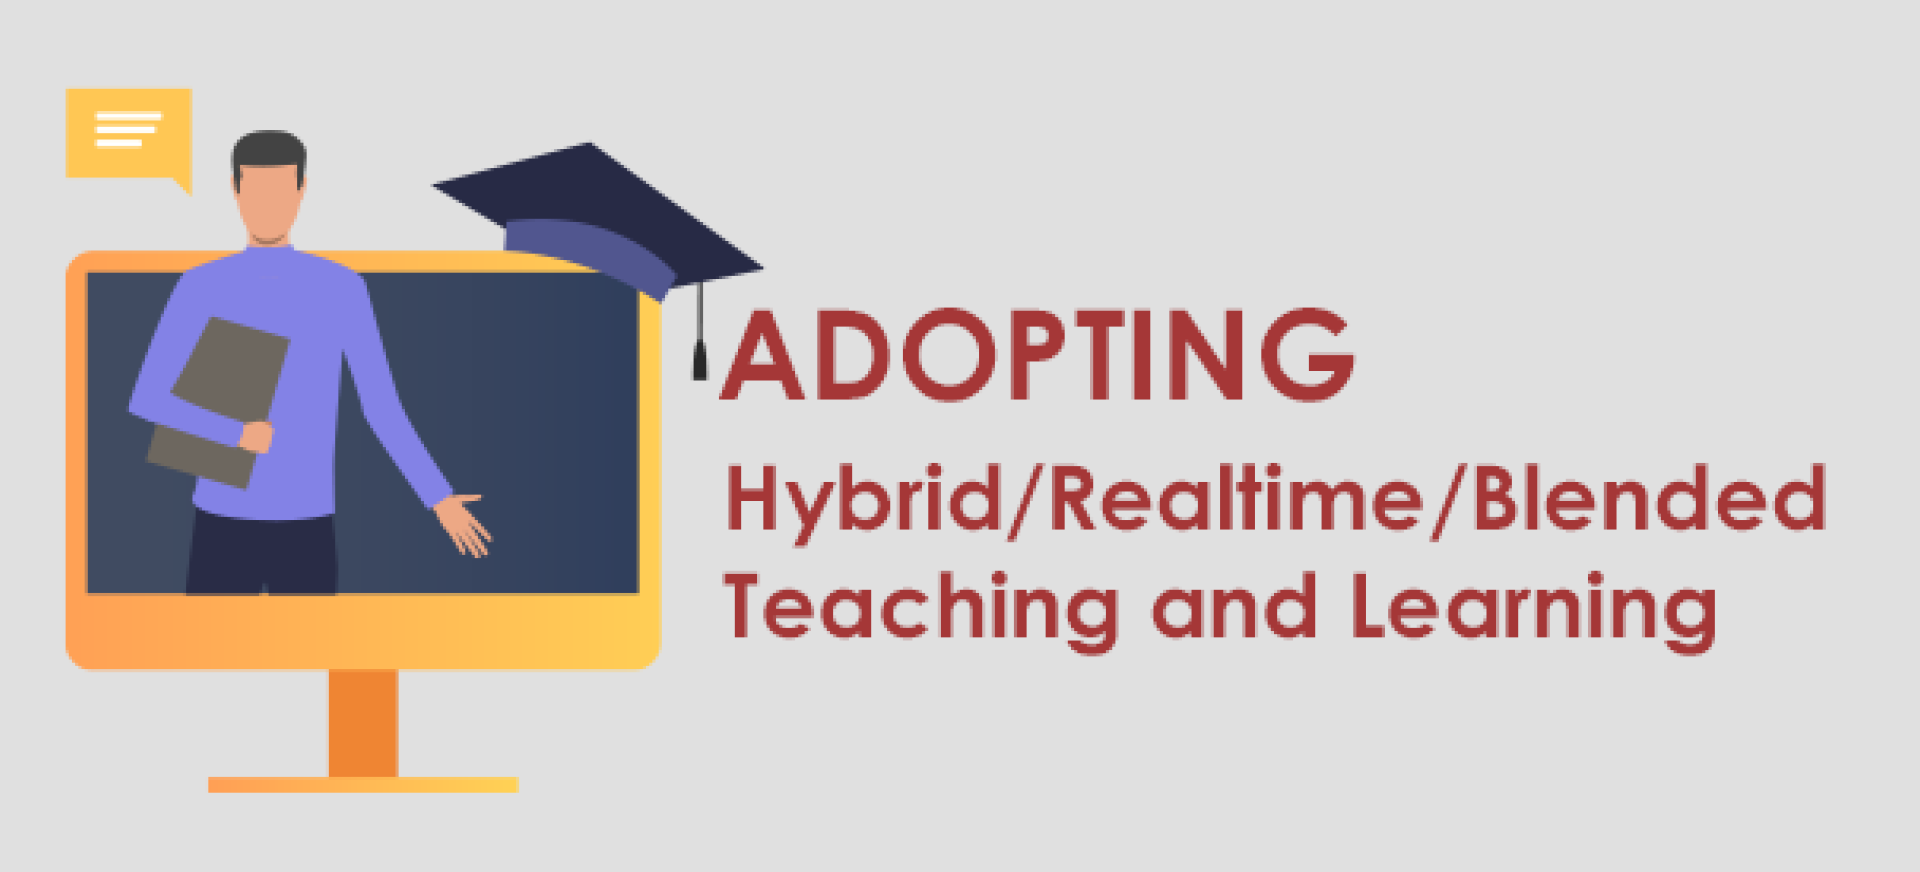 Adopting Real Time Online Learning and Teaching